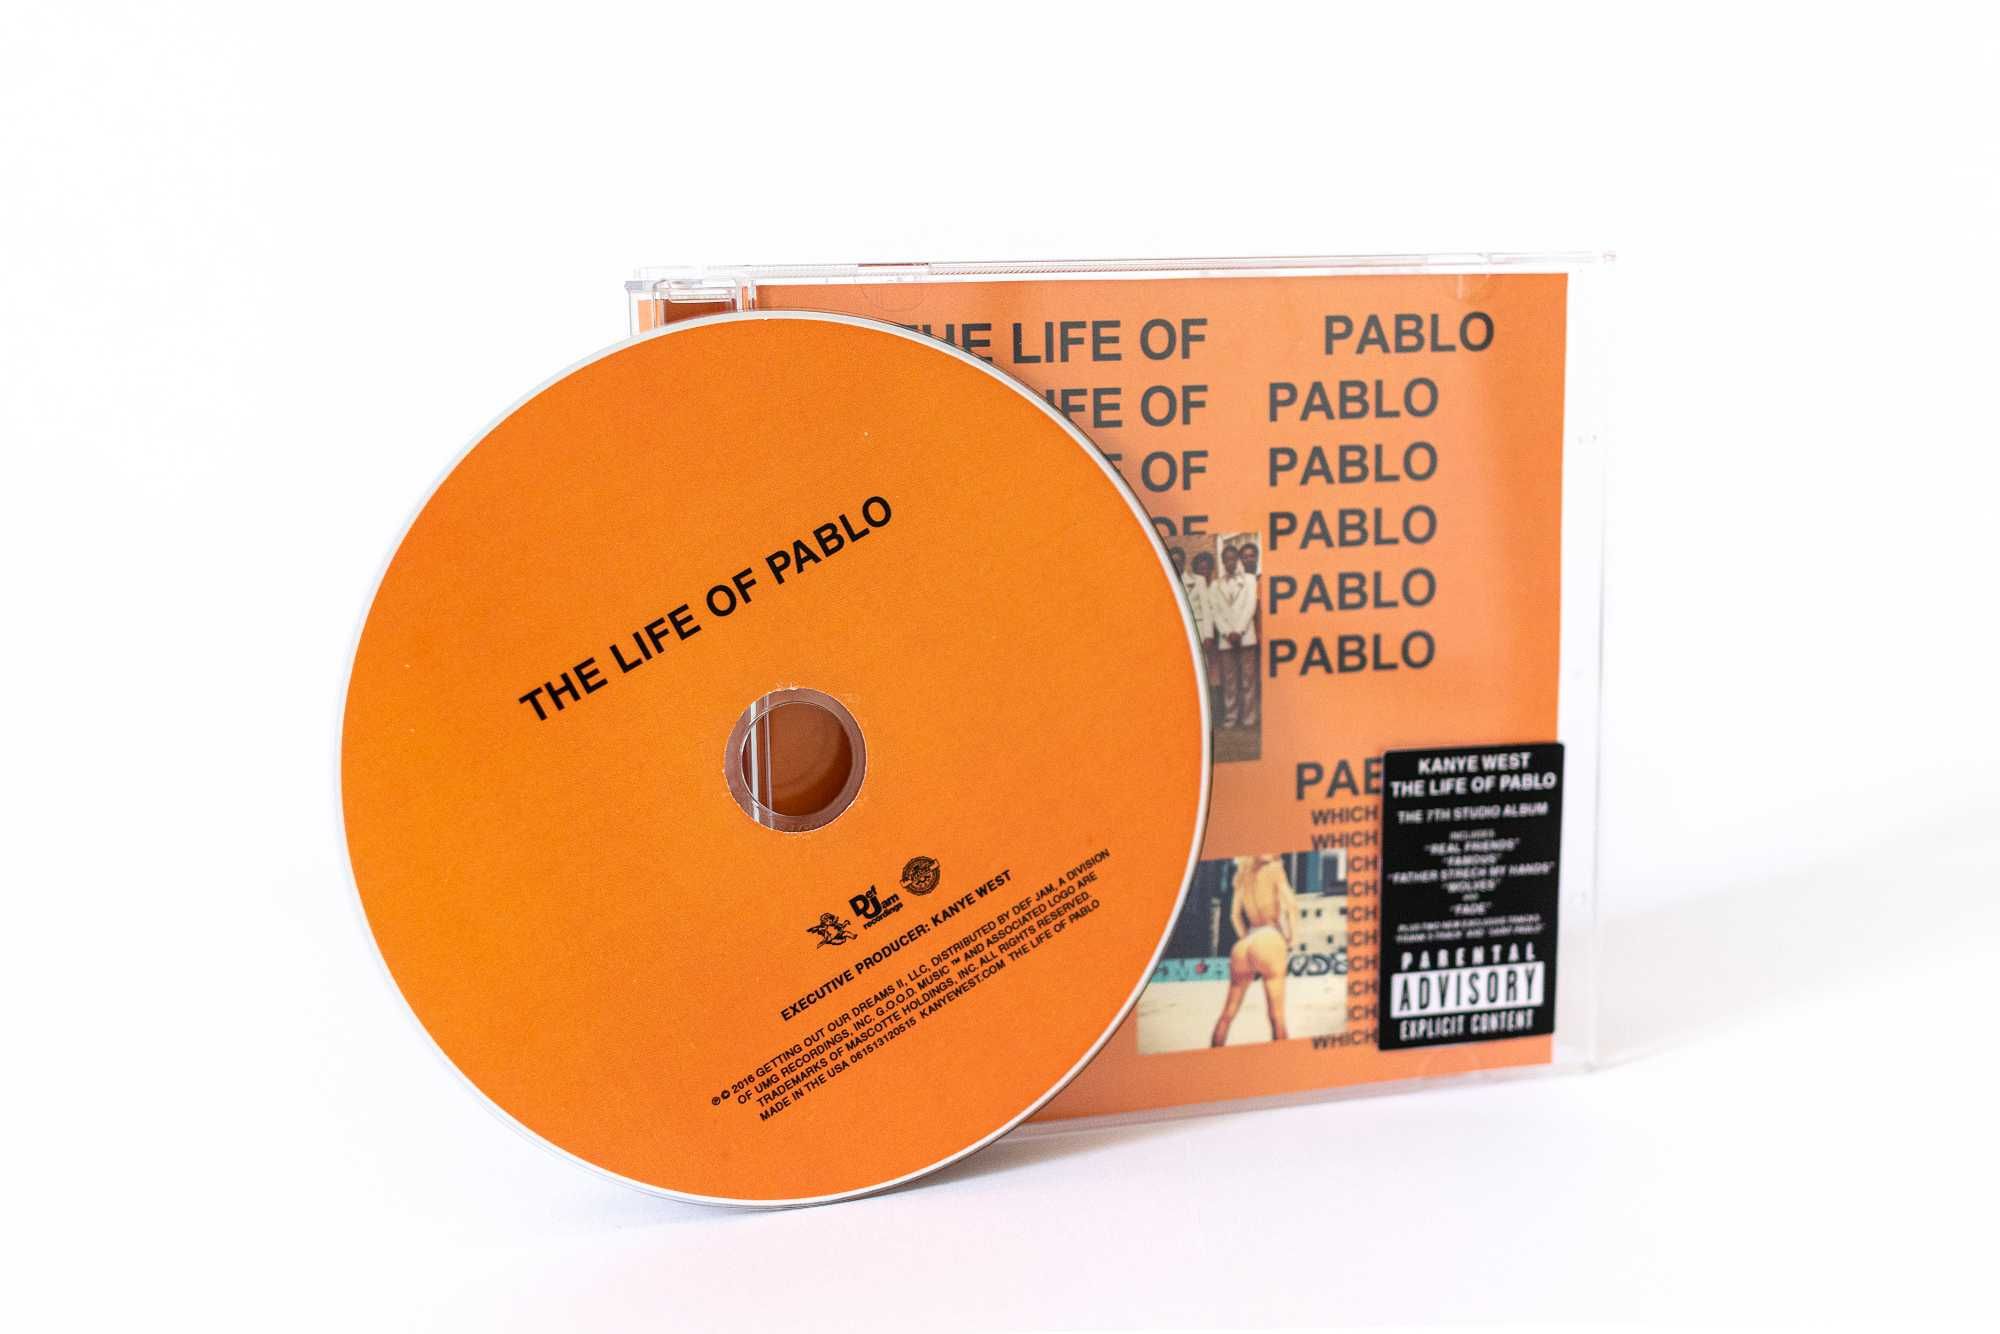 CD KAYE WEST Vultures 1 & The Life of Pablo "LOP"